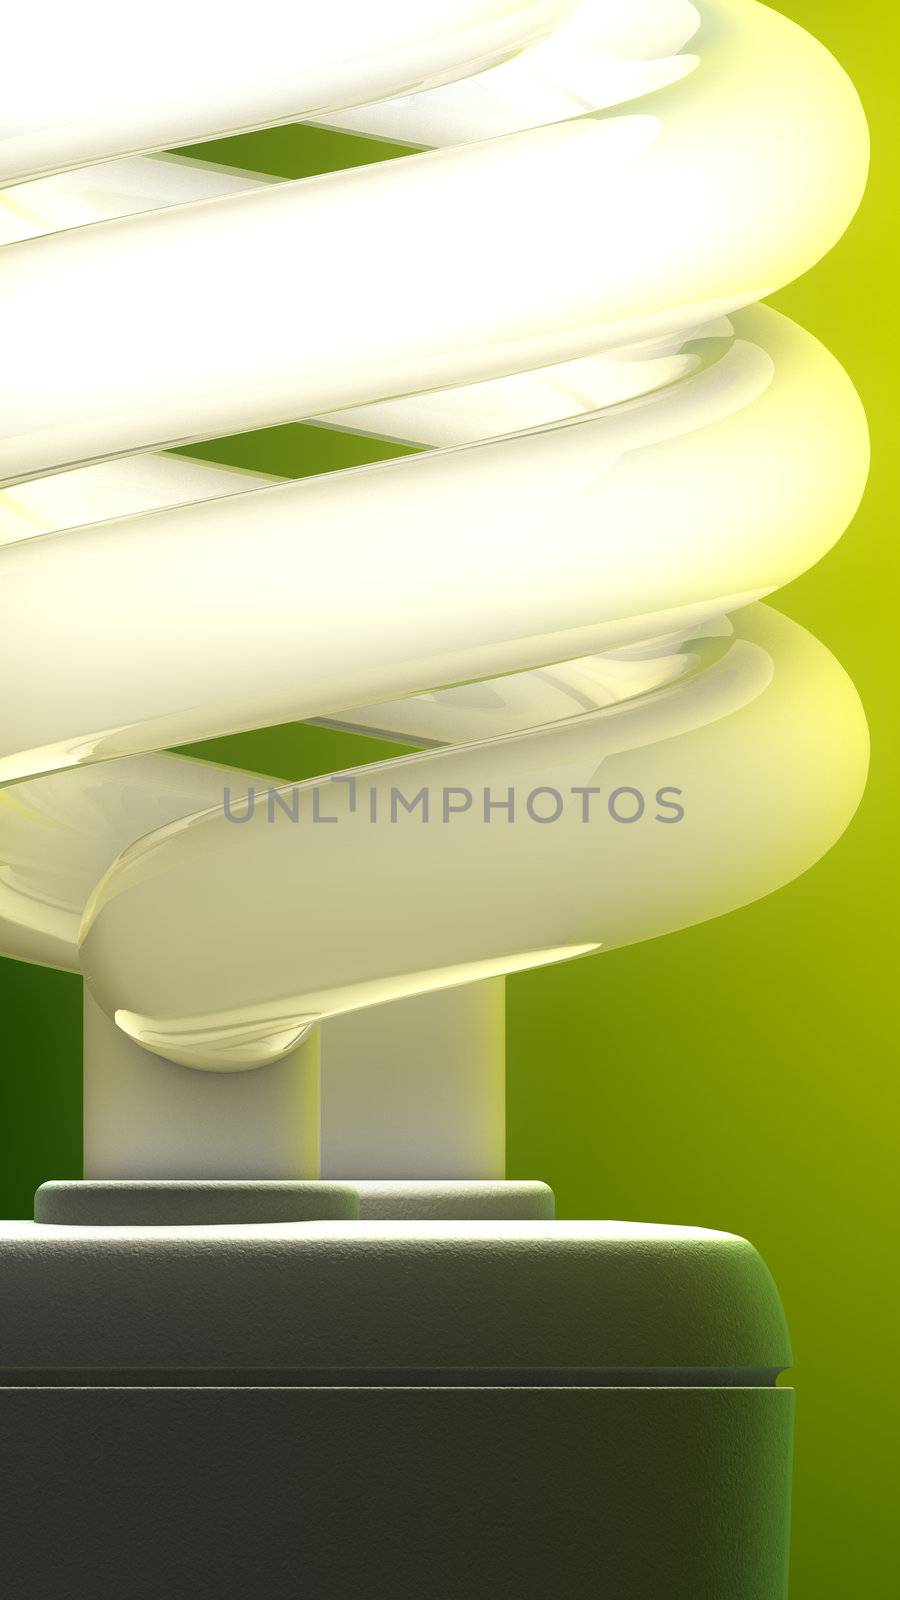 Compact fluorescent lamp close-up. Green background, ecological metaphor.